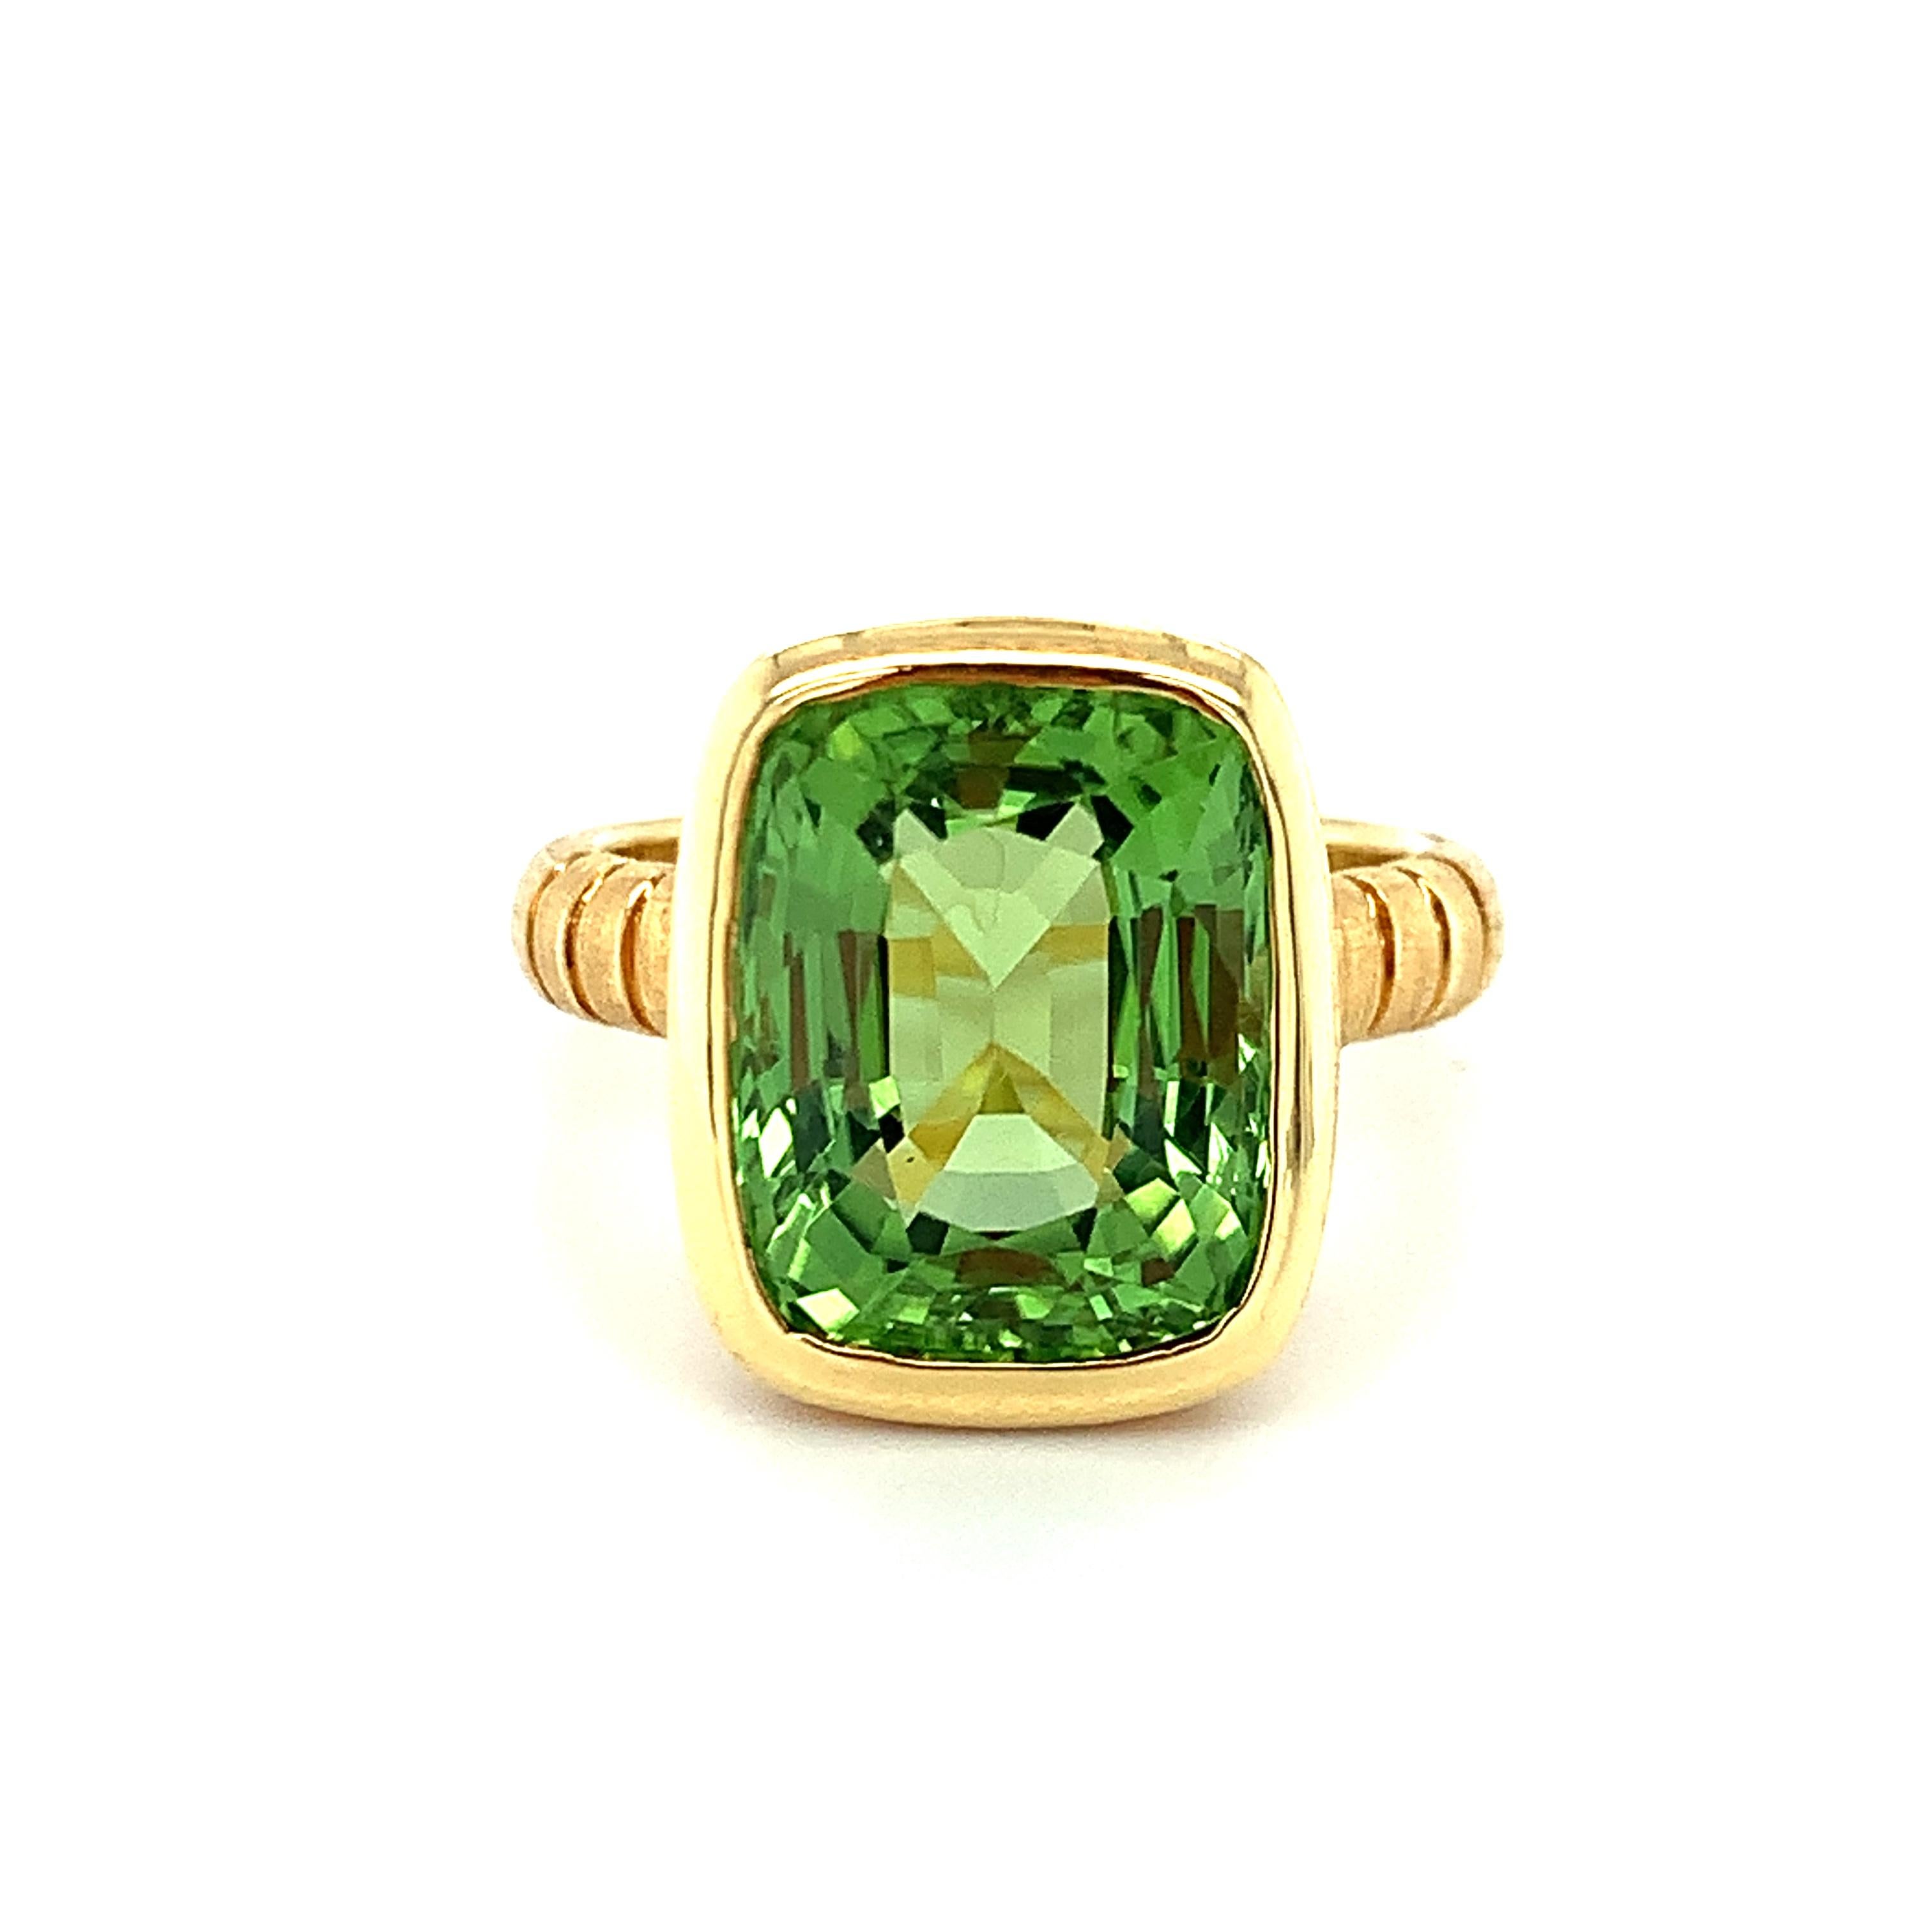 This 18k yellow gold handmade ring features a luscious grass-green peridot weighing 7.88 carats faceted in a handsome cushion shape. The peridot has been bezel set in one of our signature rings, designed to showcase a fine quality gem that deserves